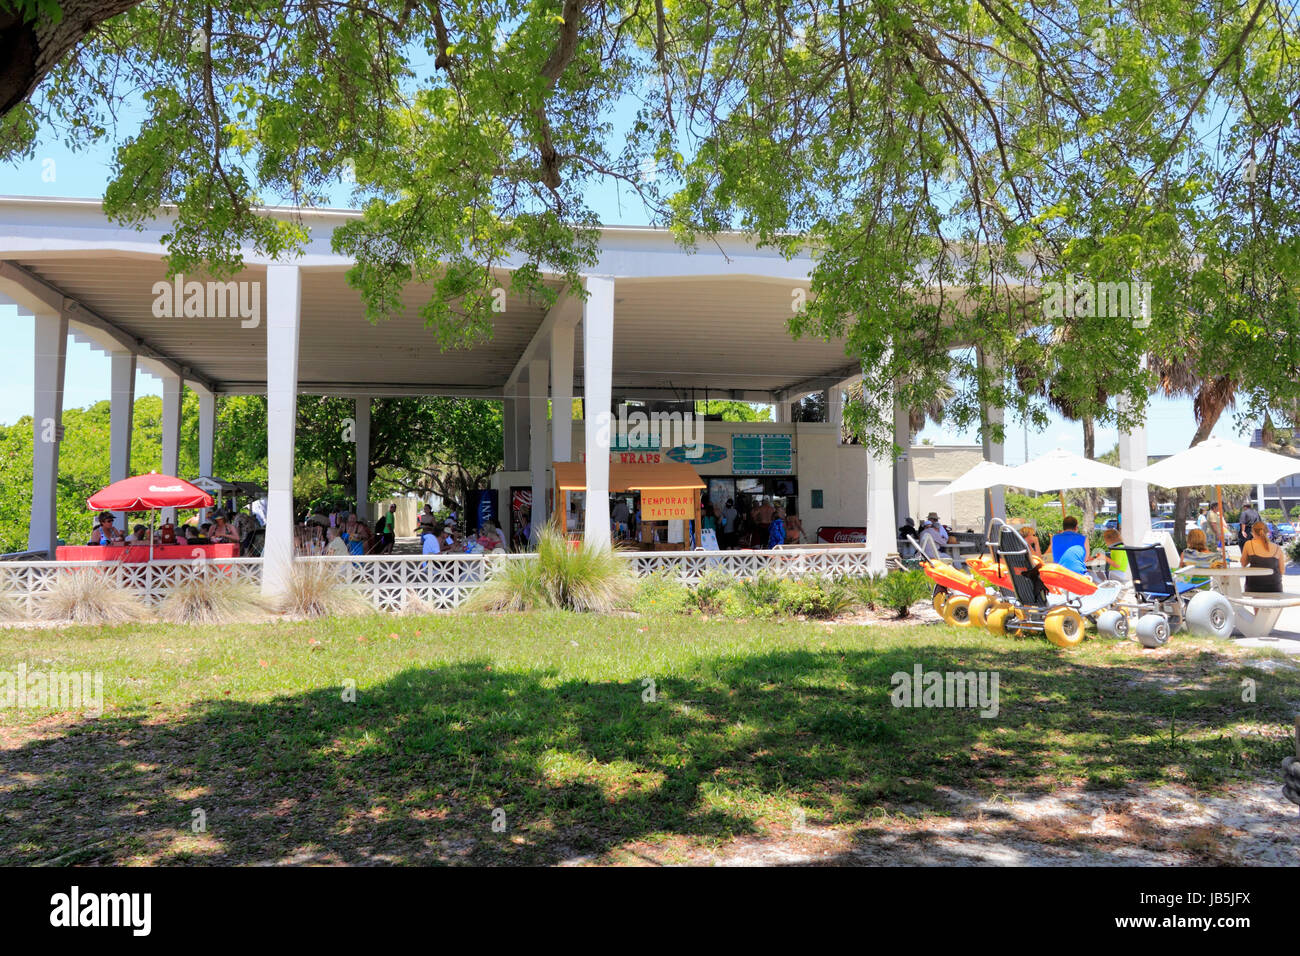 SIESTA KEY, FLORIDA - MAY 9, 2013: Large covered concession stand serving food and beverages with people eating and drinking at shaded tables and seating, beach equipment for rent, restrooms and more. Stock Photo